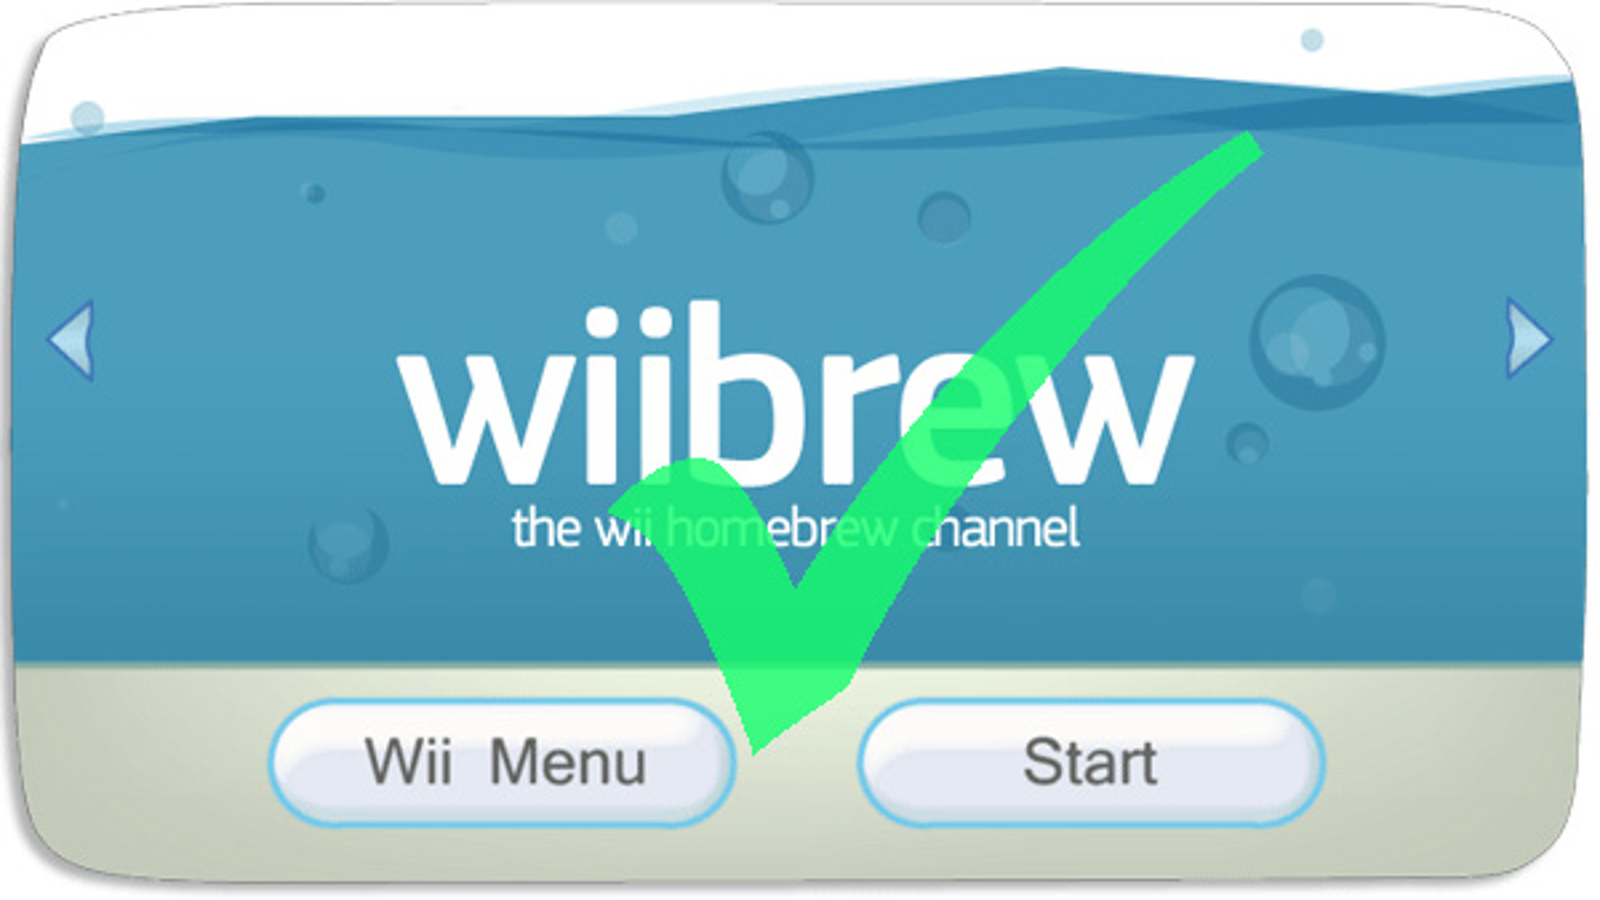 wii homebrew channel